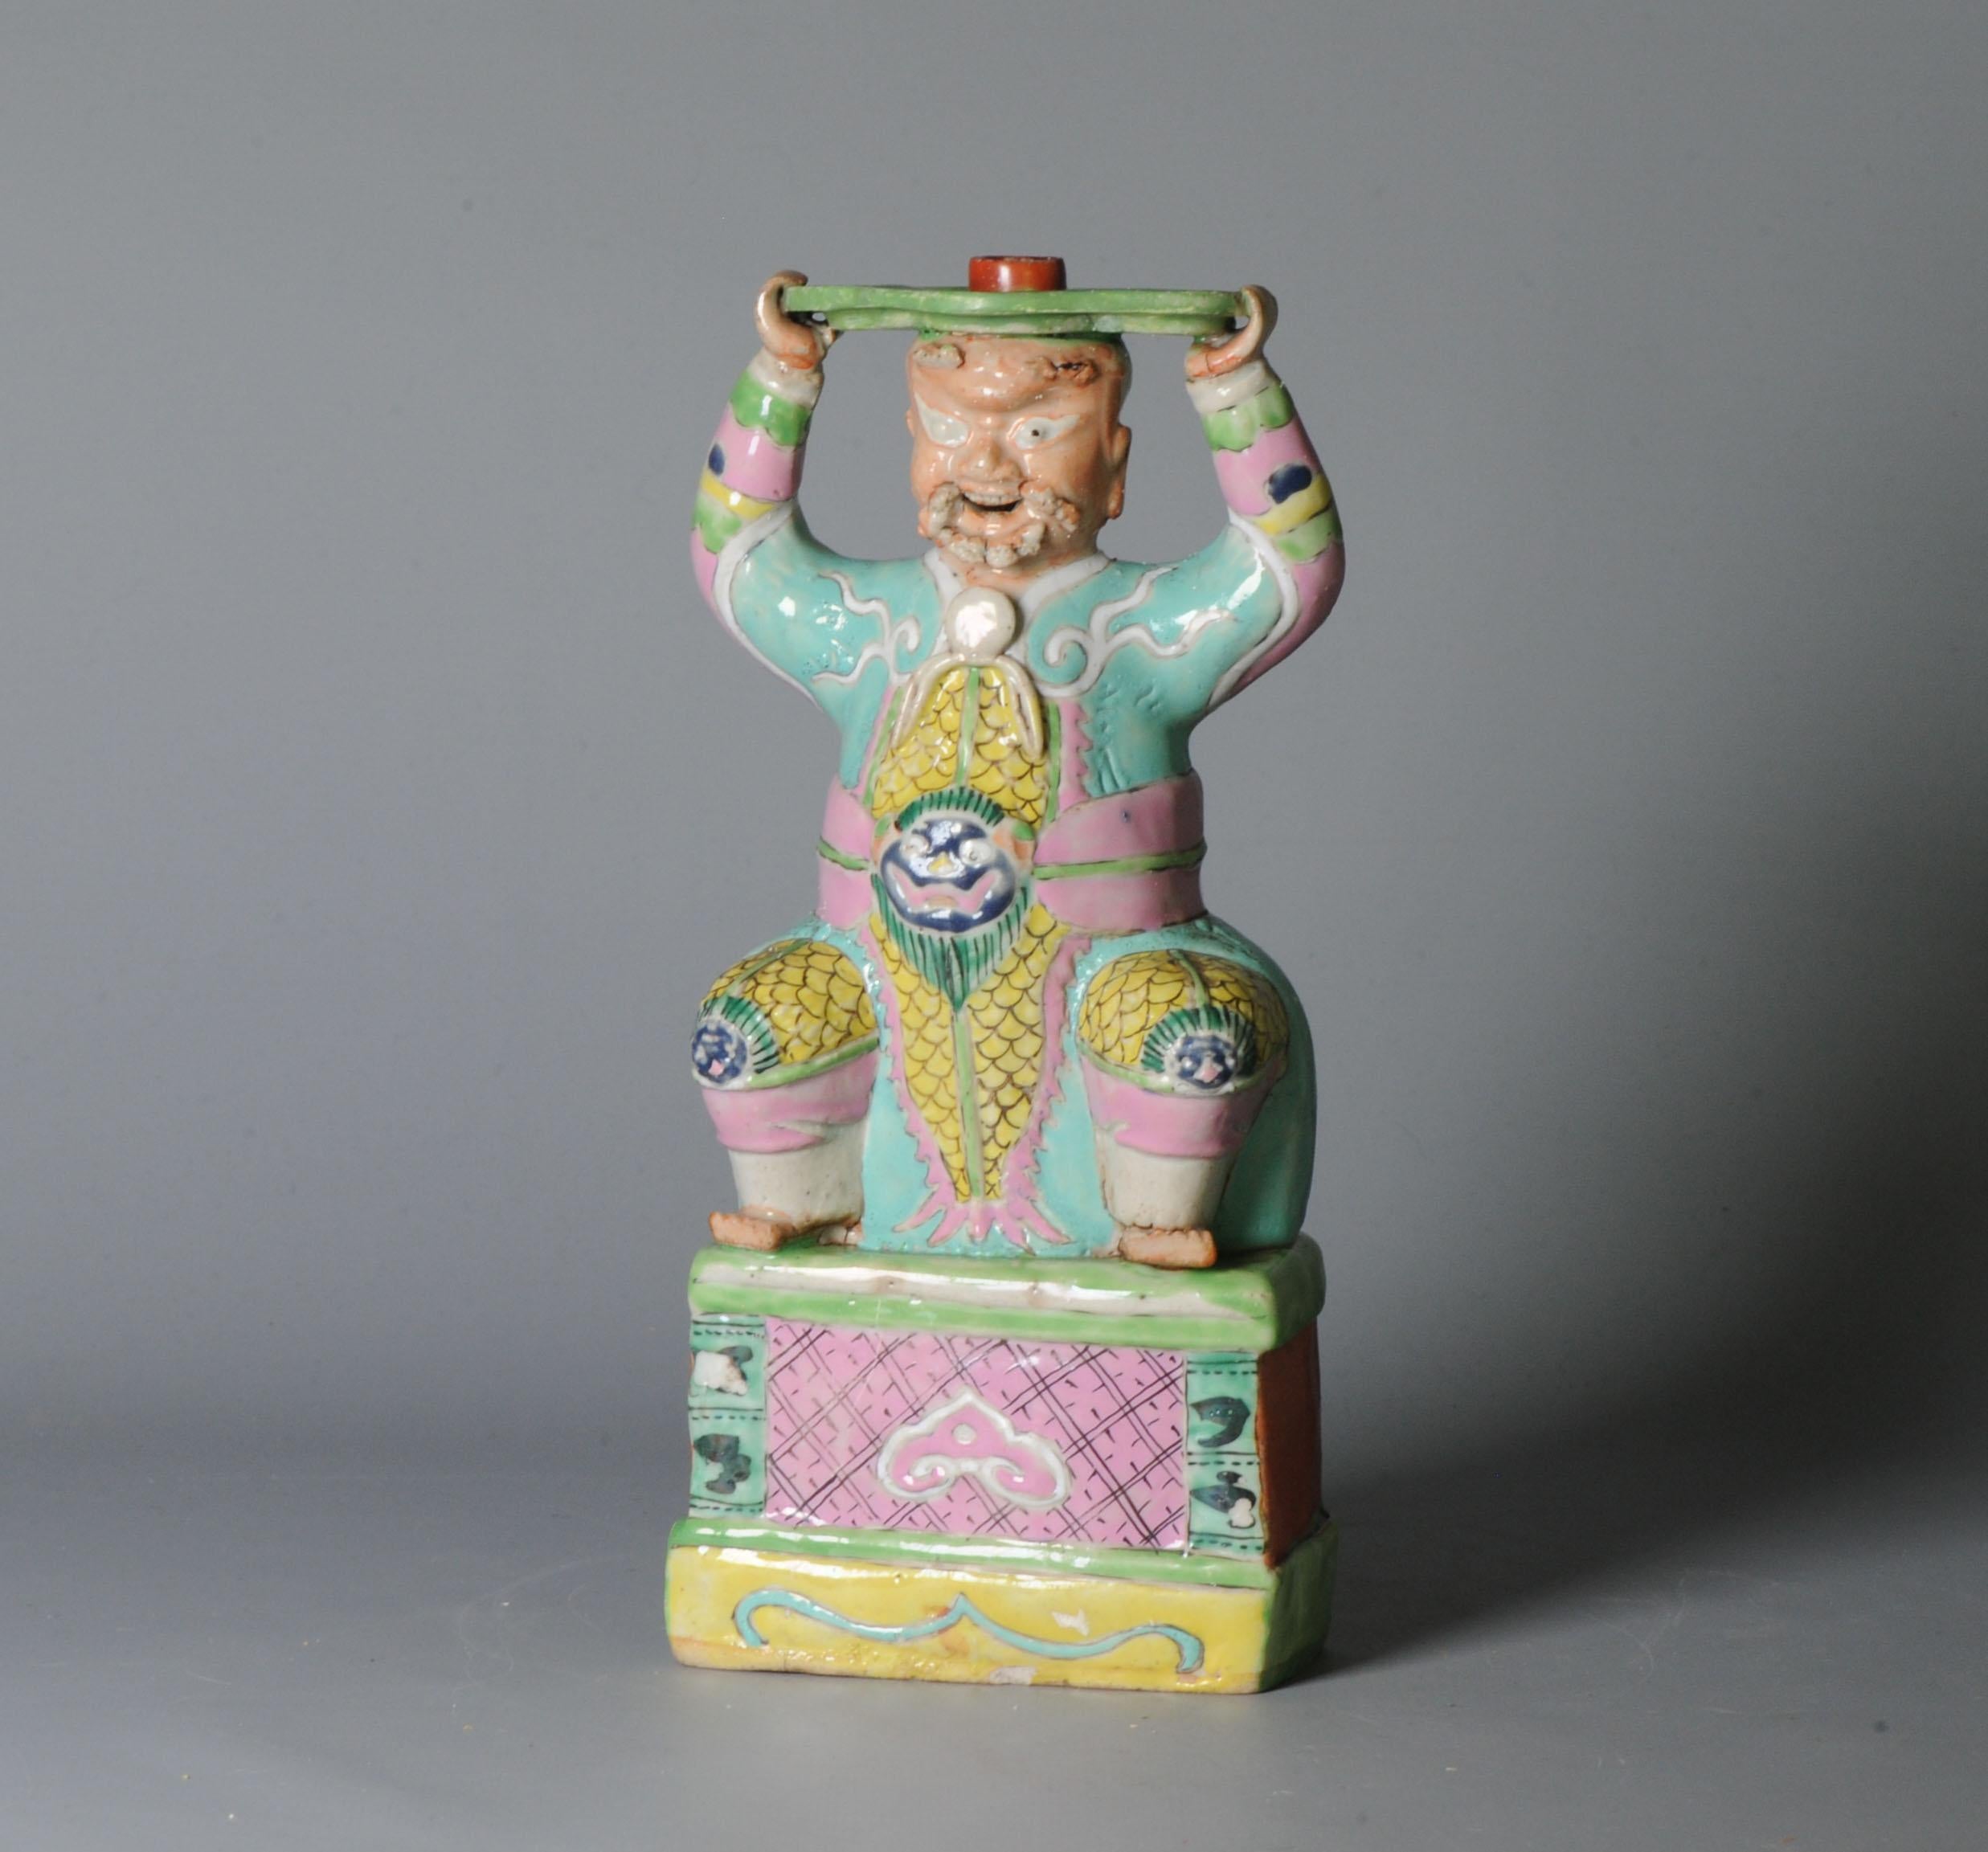 Description
Very interesting and beautiful statue of a figure holding a piece above his head. Which figure it is will need to be investigated. Could be The Chinese military god of wealth, also known as General Zhao Kong Ming, is a revered deity